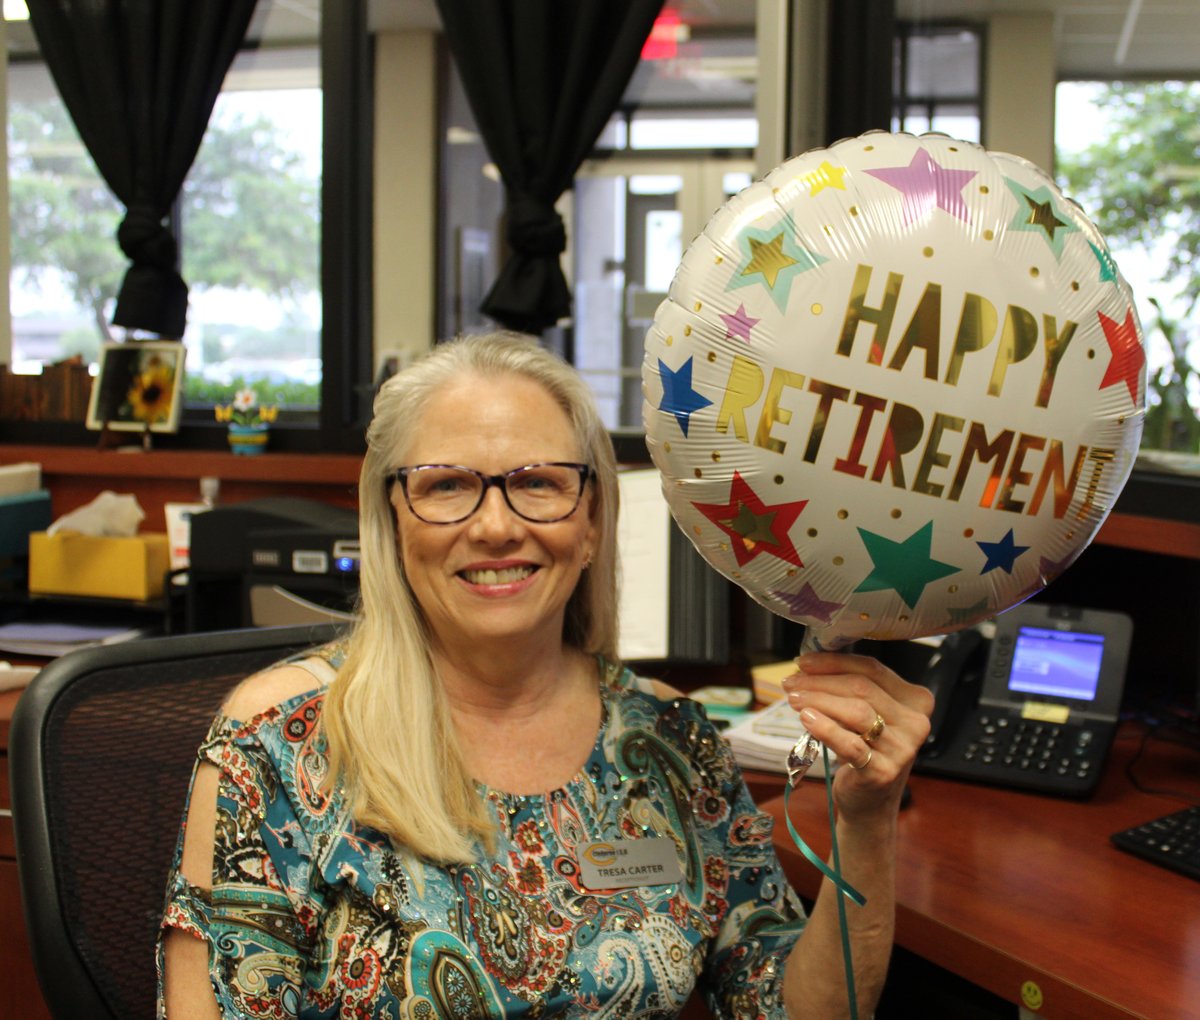 You may know Tresa Carter as the welcoming voice when you call the CISD Central Offices and the friendly face at the reception desk. She is taking her last phone calls today as she retires following 20 years of service in CISD! Congratulations, Tresa, as you begin a new chapter🌟